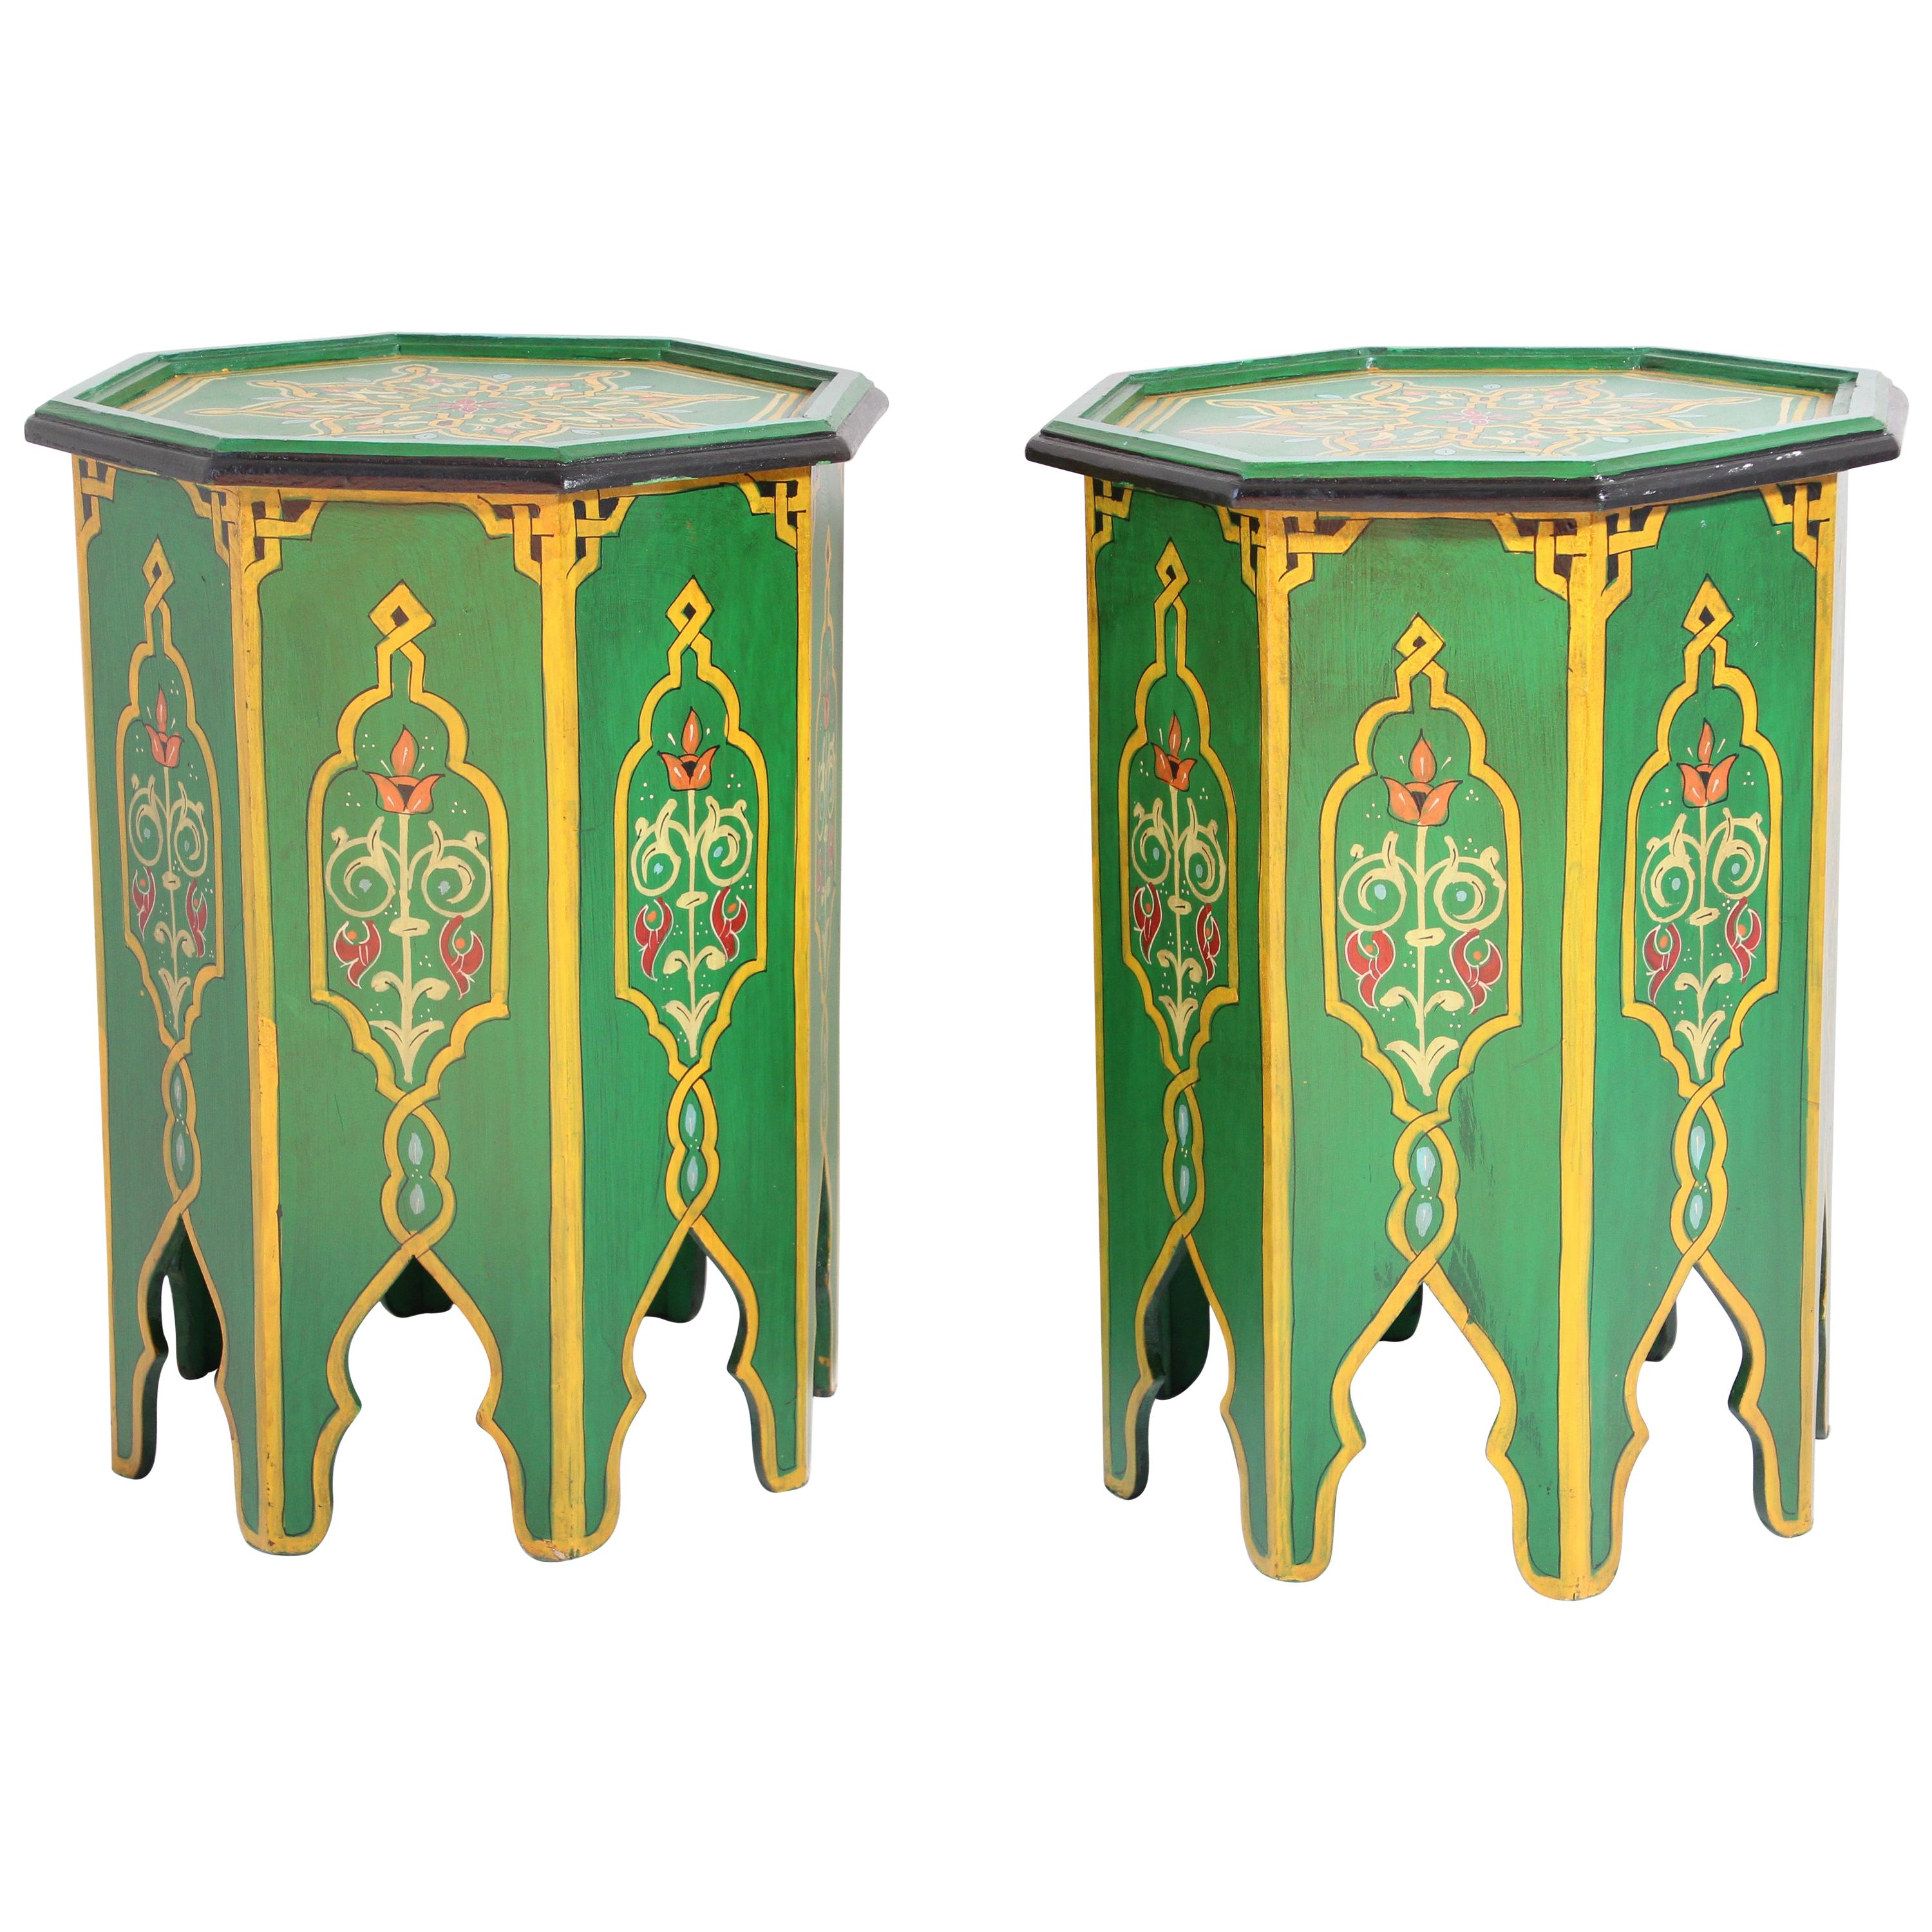 Pair of Green Moroccan Hand Painted Pedestal Tables